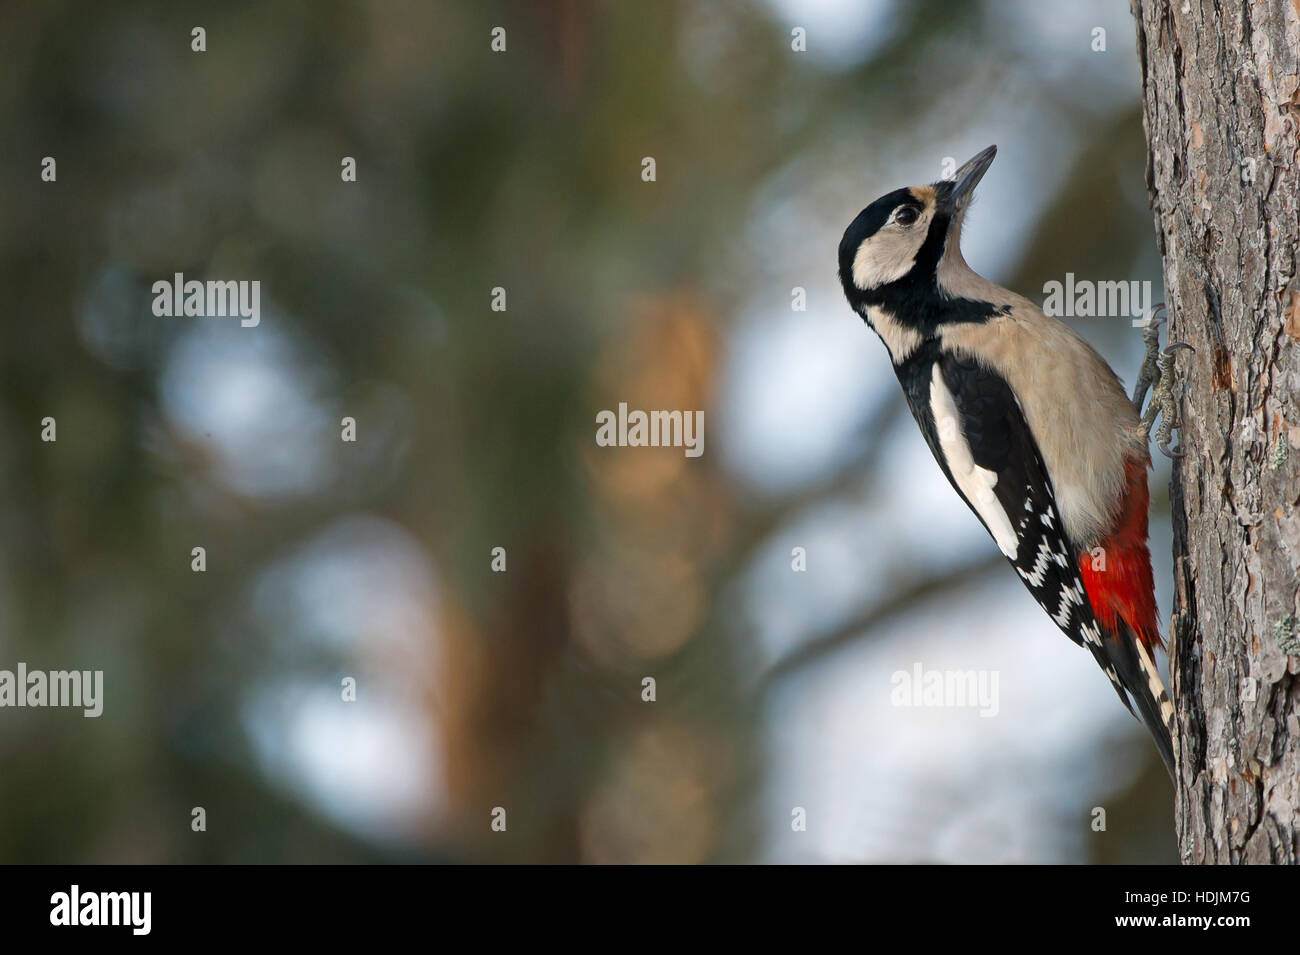 The female Great Spotted Woodpecker or Greater Spotted Woodpecker (Dendrocopos major) sitting on the pine bark in the forest. Stock Photo